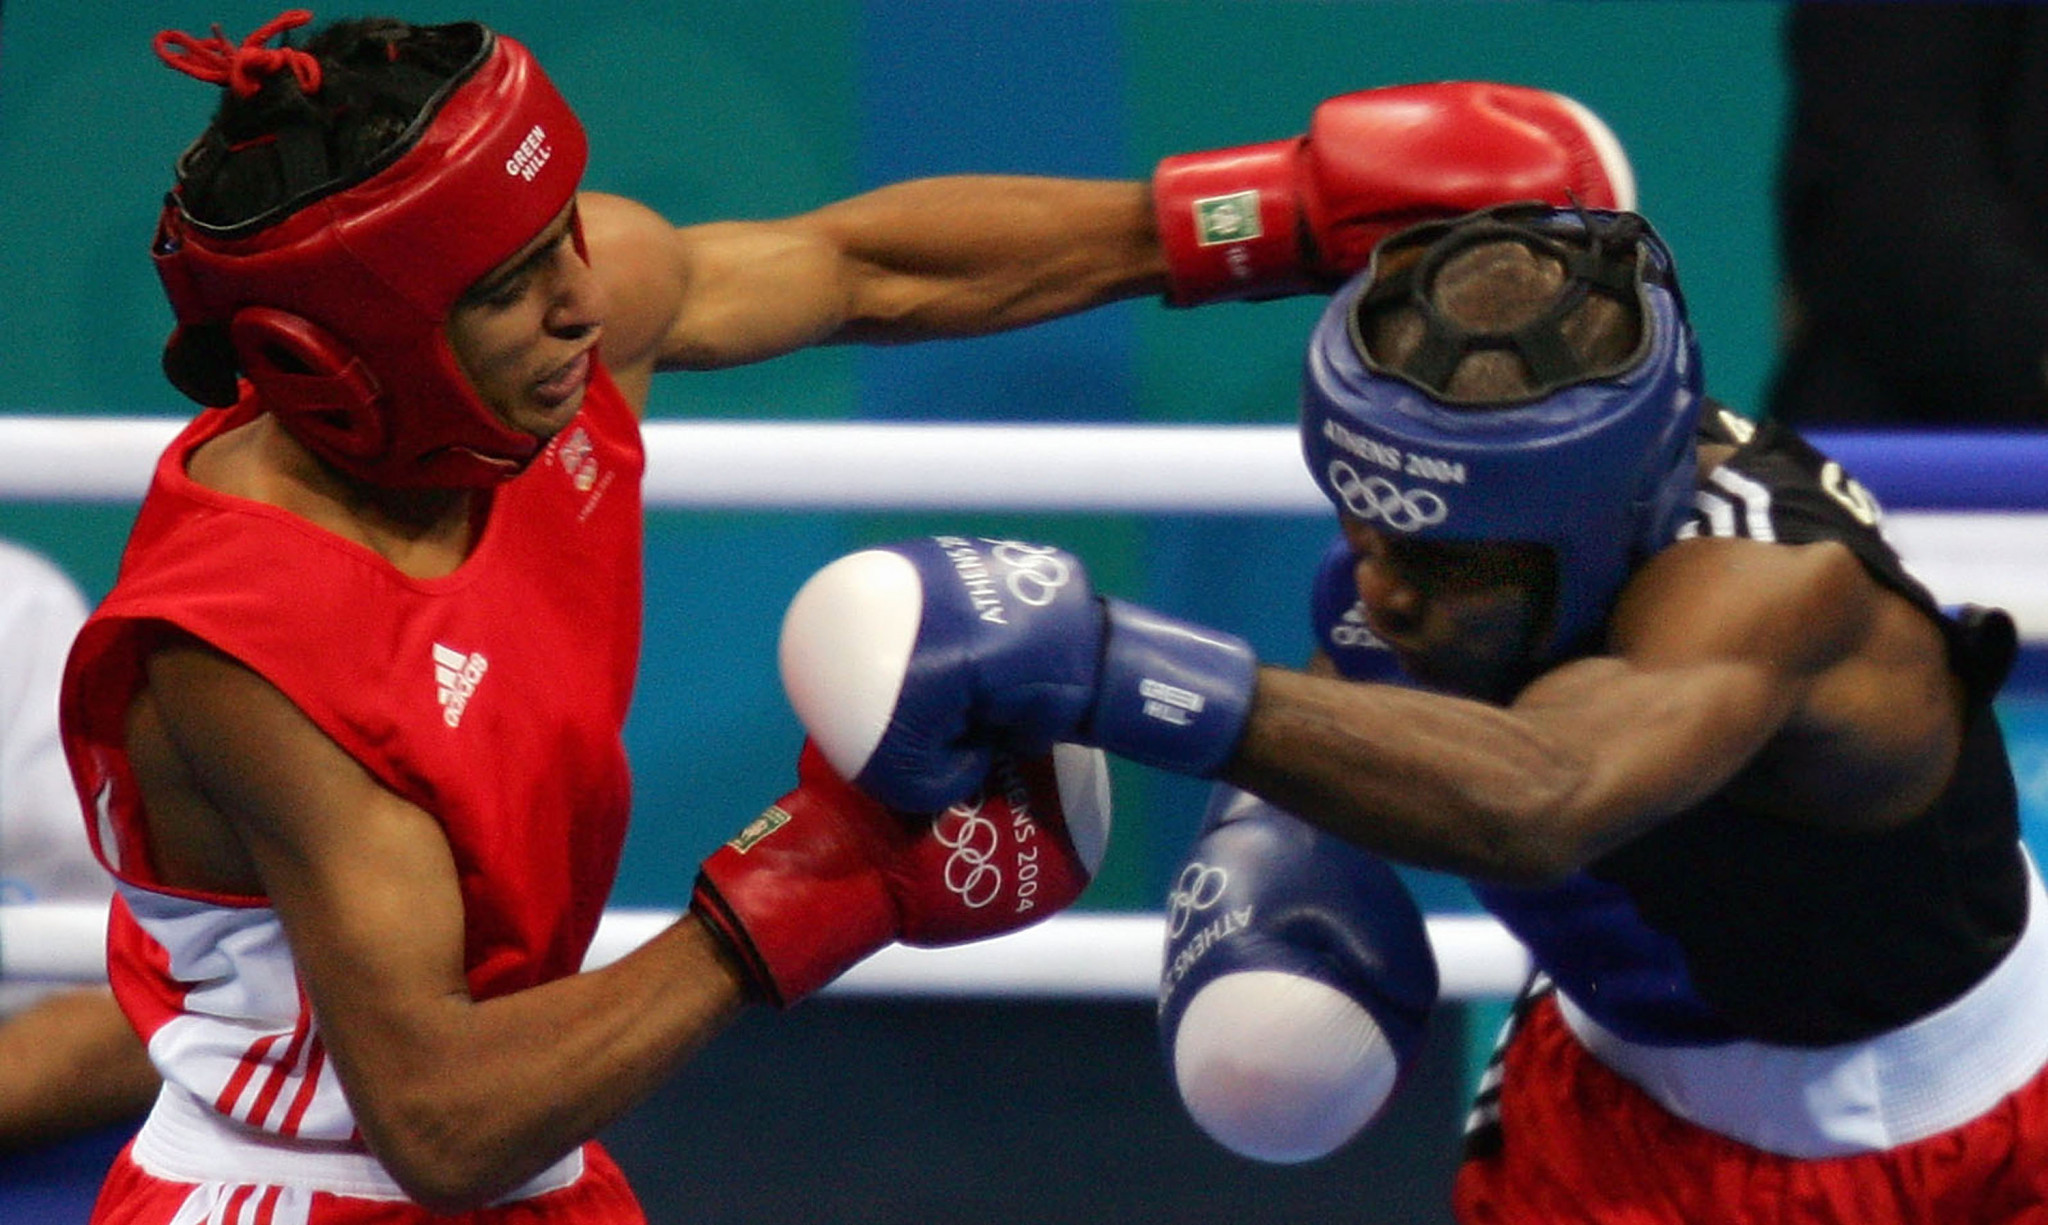 Amir Khan, left, won lightweight silver at the Athens 2004 Olympics, being defeated in the gold medal match by Cuban Mario Kindelan ©Getty Images